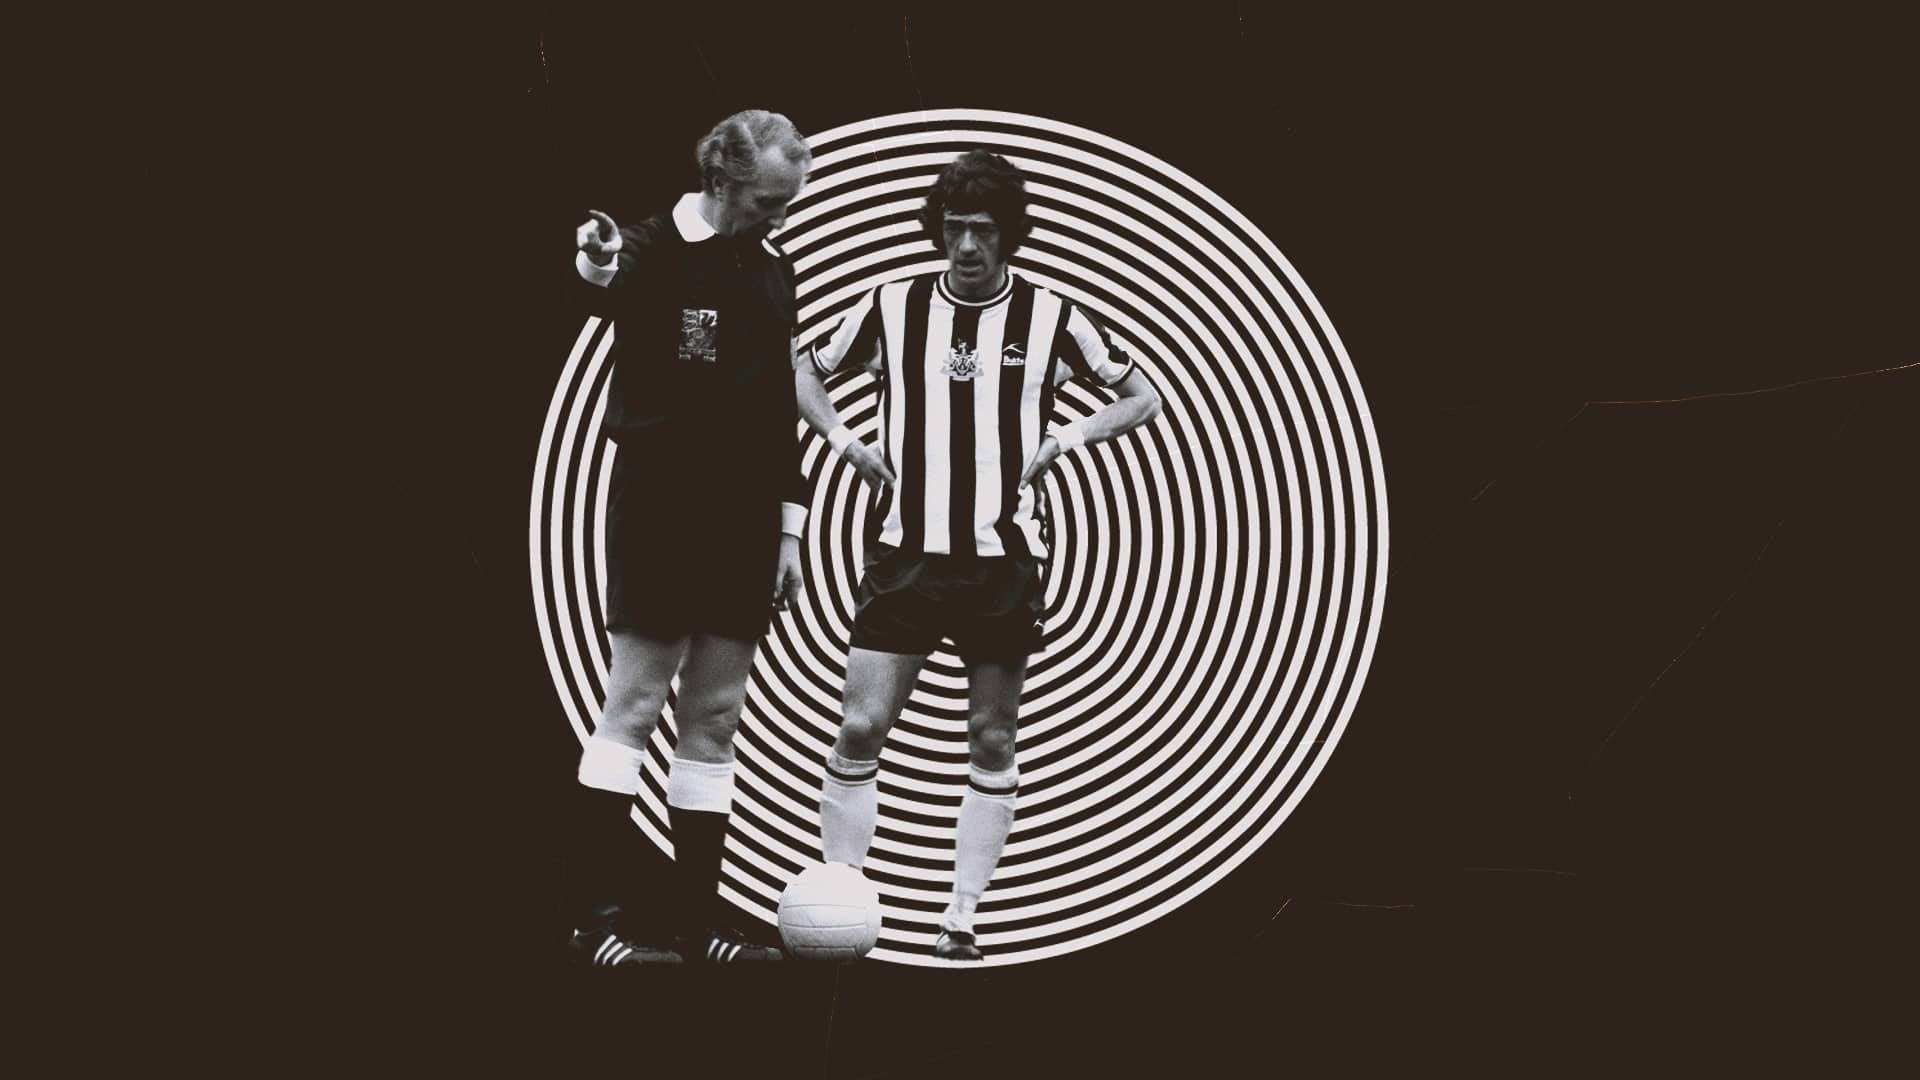 Terry Hibbitt, in the black and white stripes of Newcastle, being ordered about by a referee